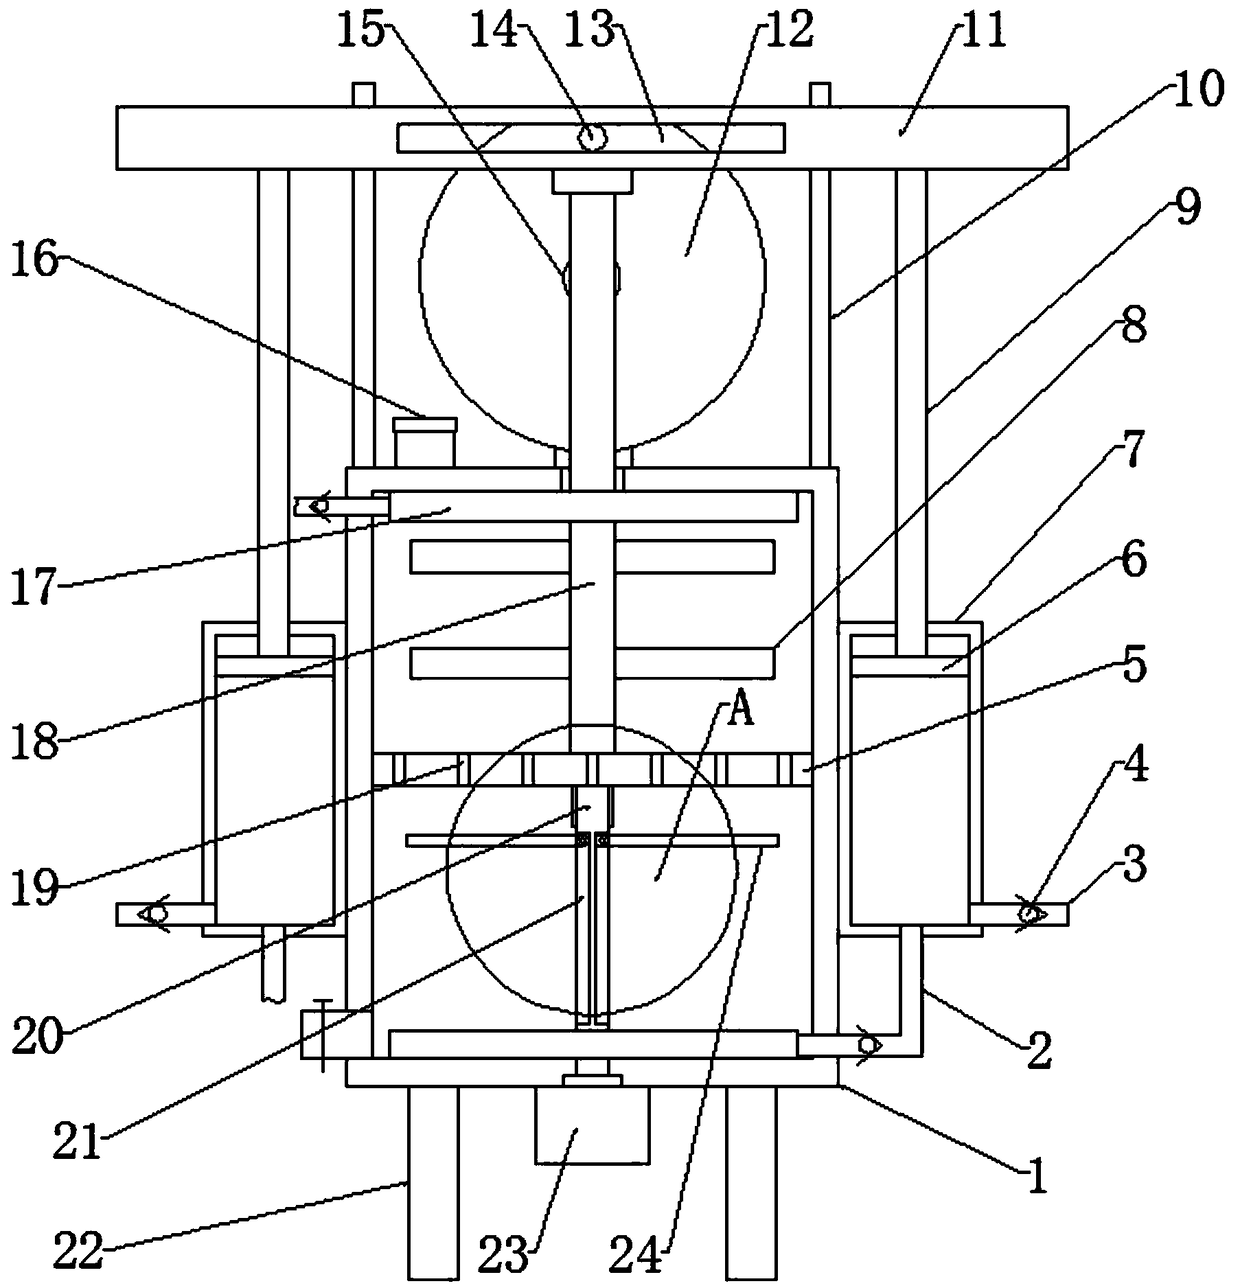 Extrusion mixing device for architectural coating